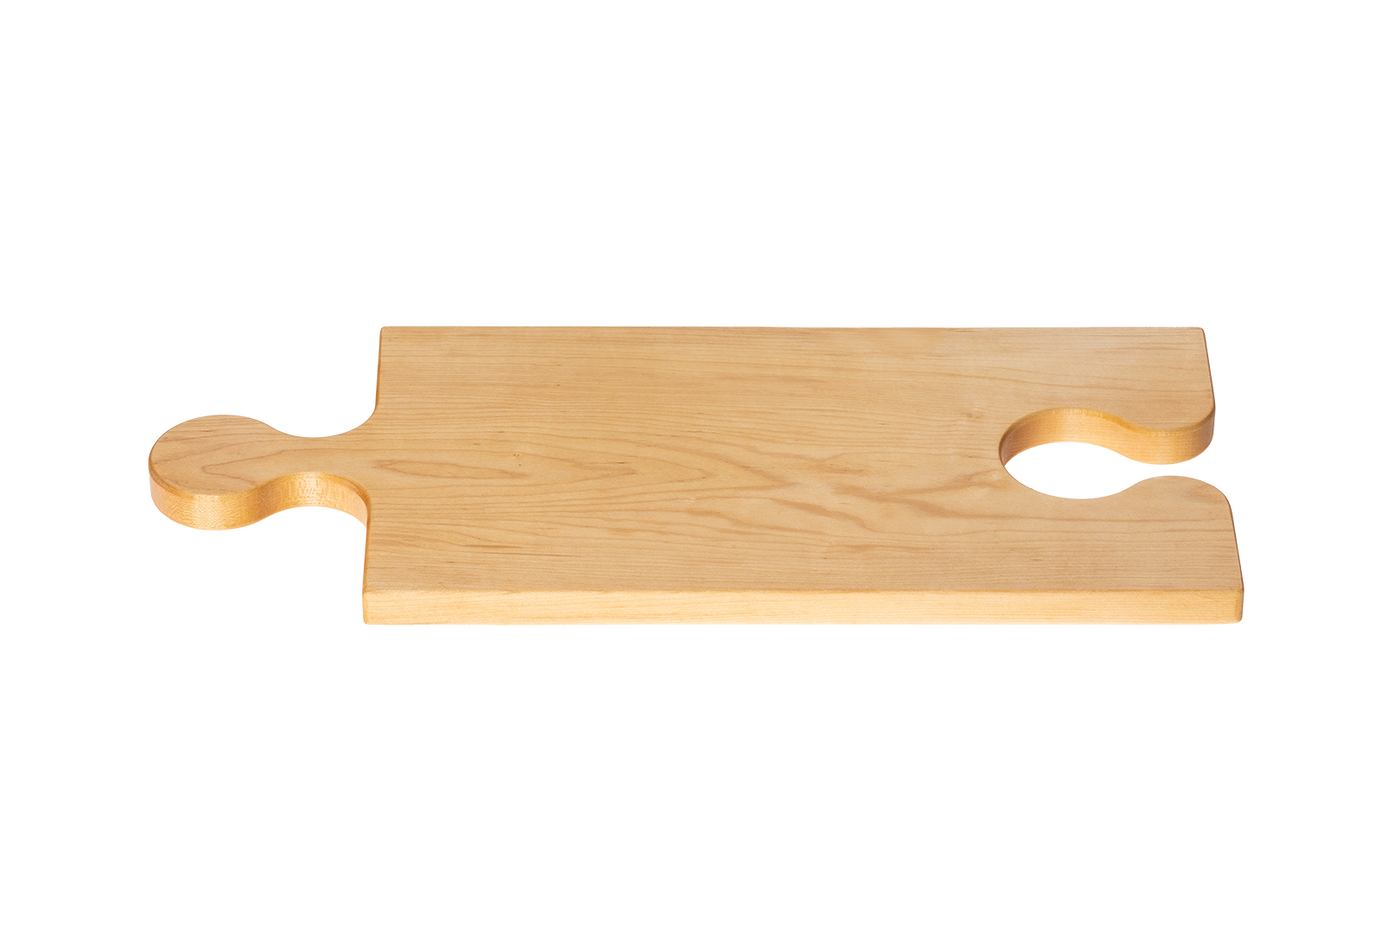 Maple - MPOH18 - Puzzle Serving Board with Hooked Handle 18''x7-1/2''x3/4''